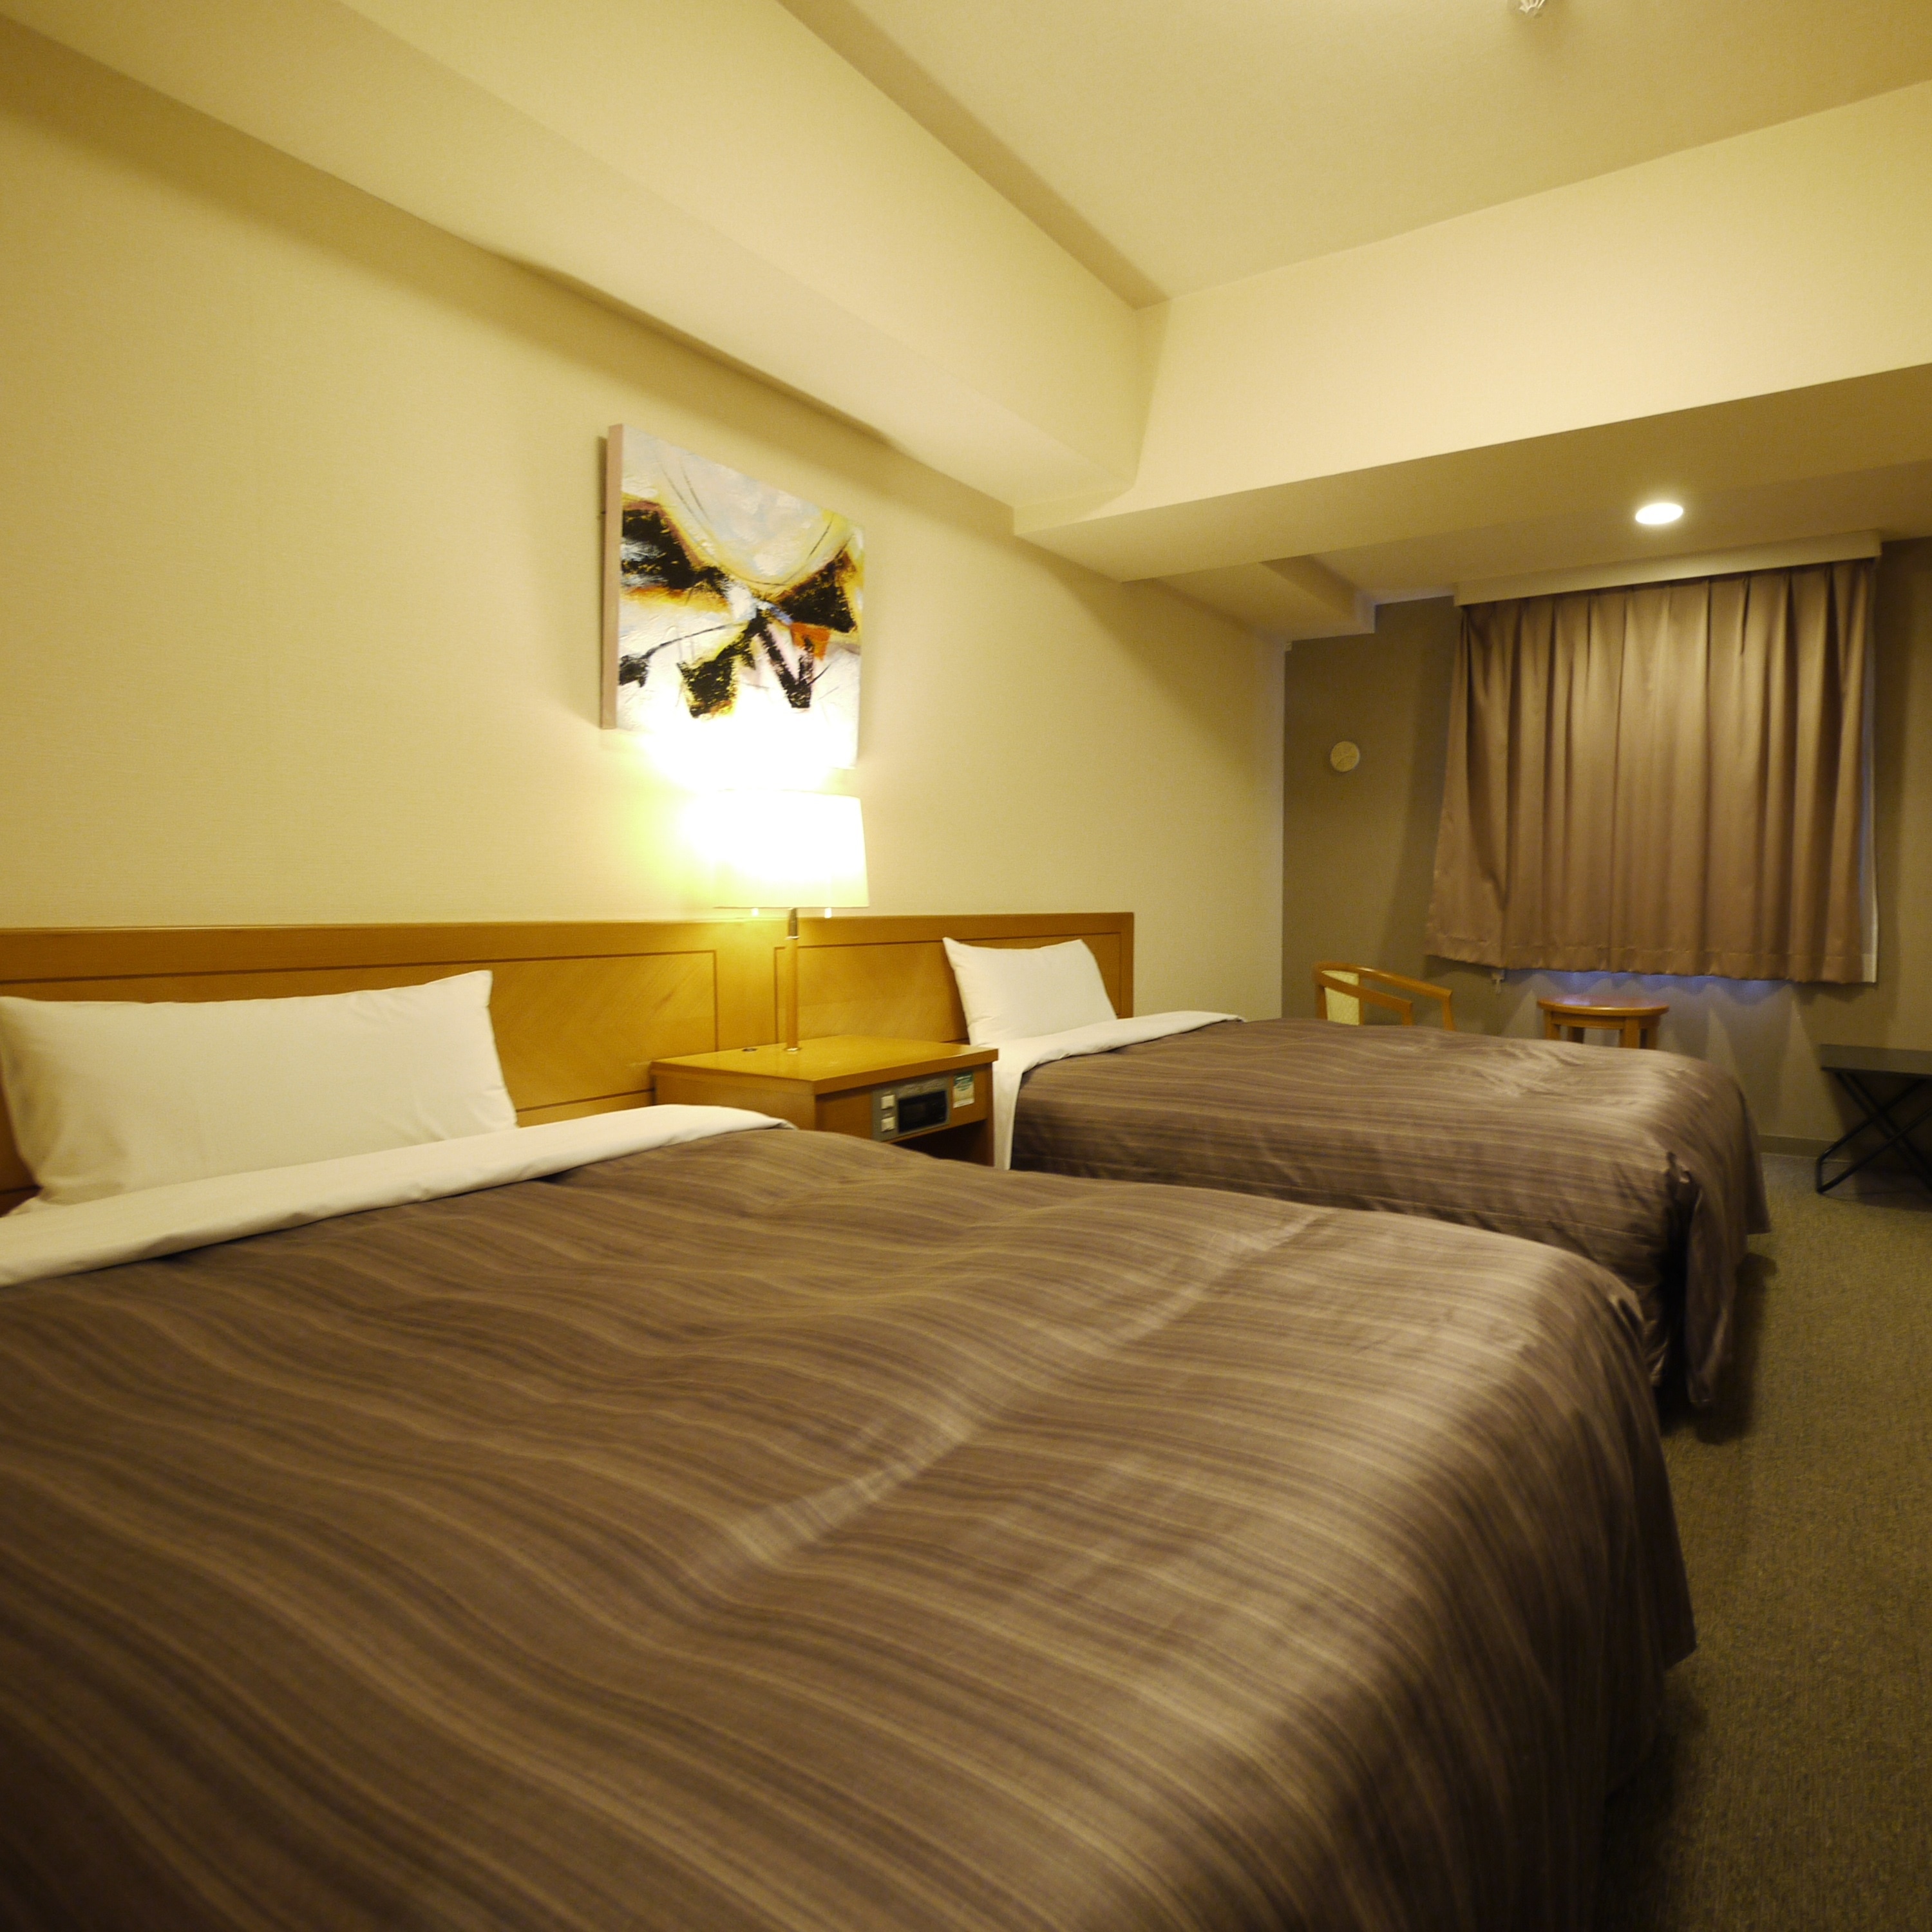 The twin room has a single bed with a bed width of 120 cm, but you can relax in a spacious room.